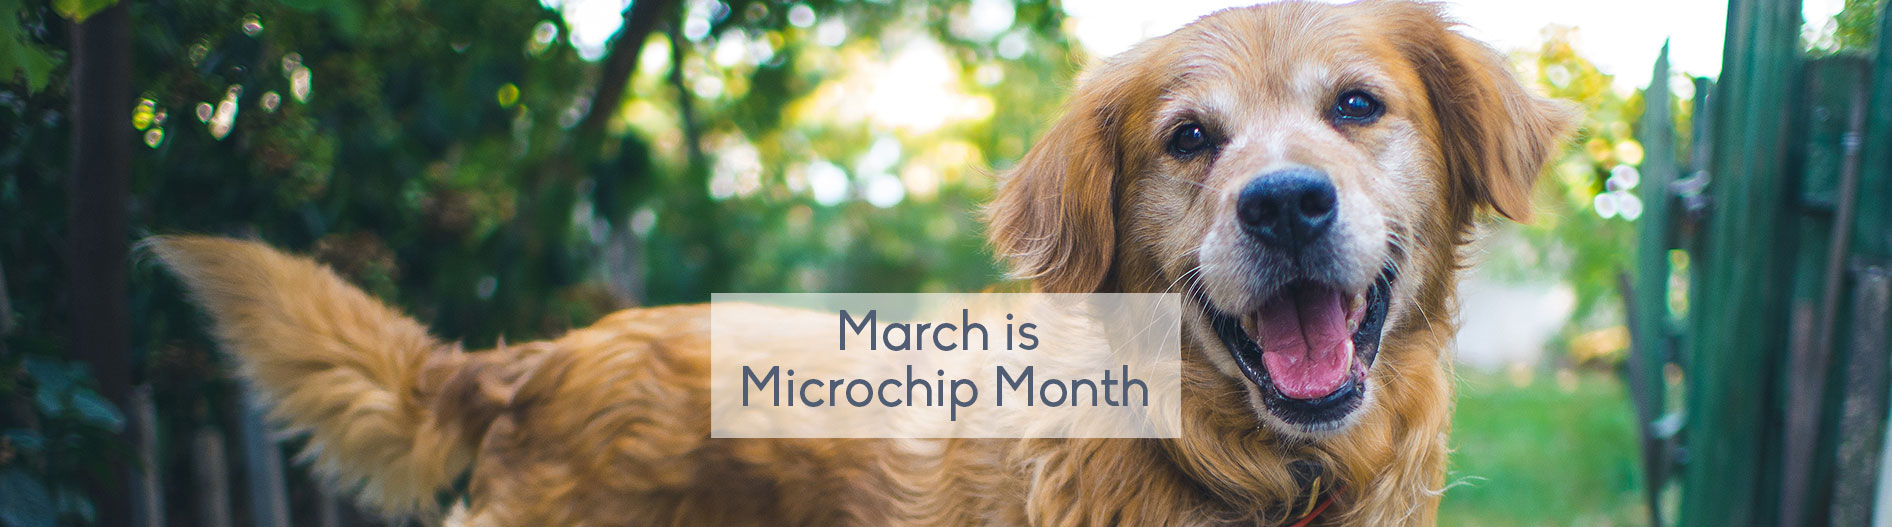 March is Microchip Month